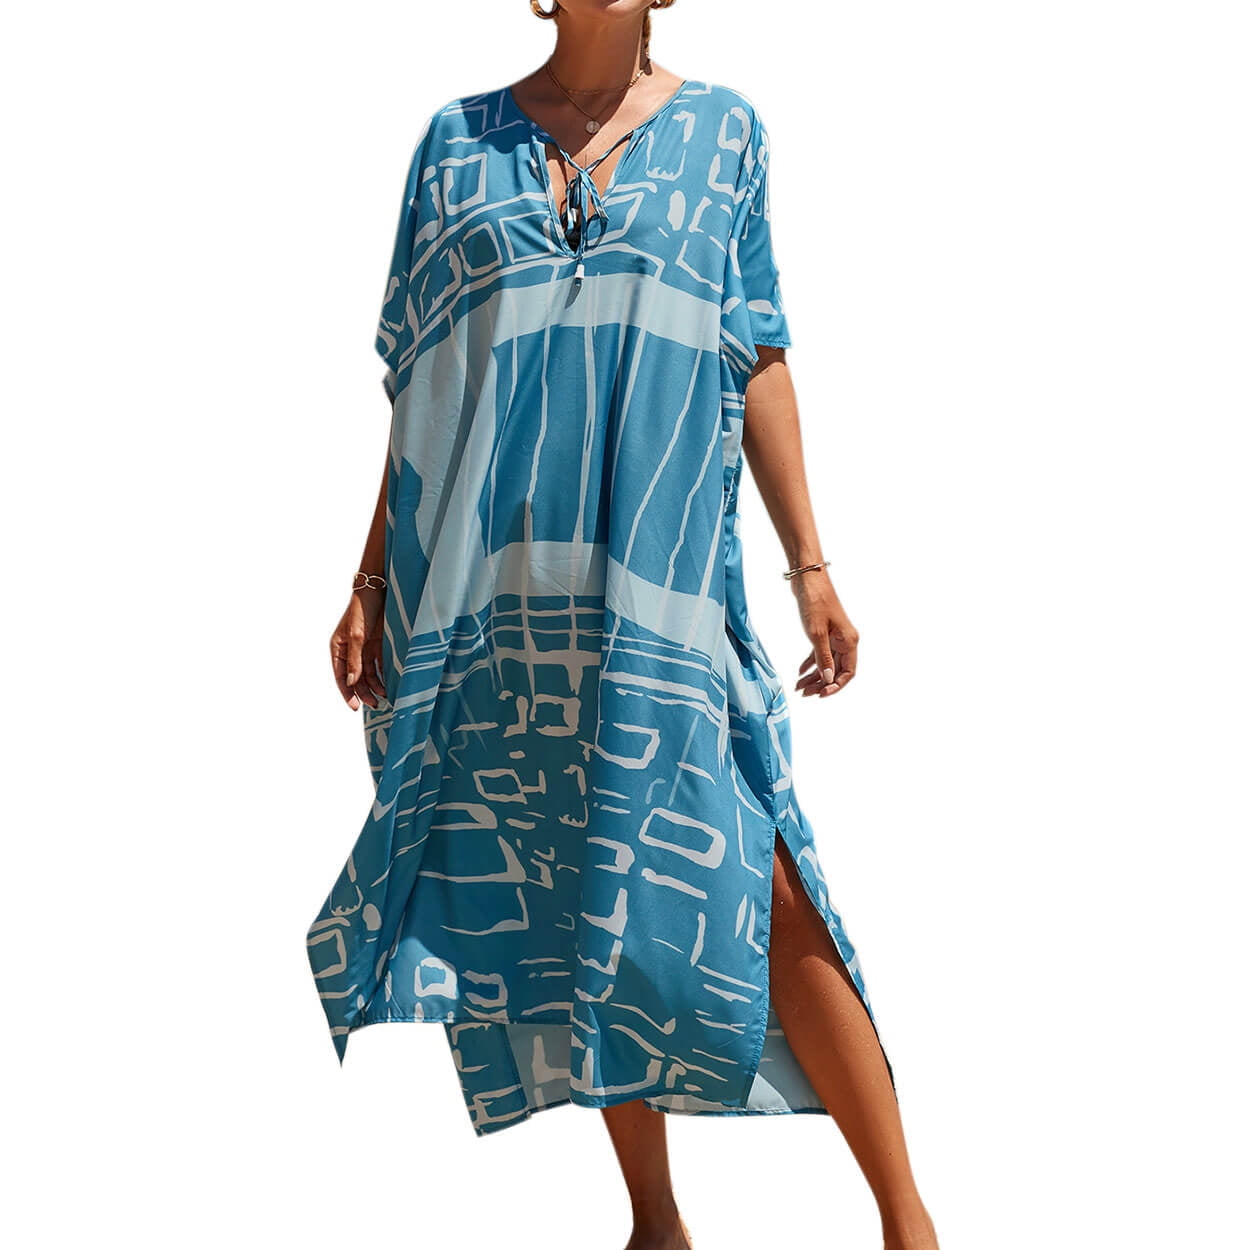 Swimsuit Coverup for Women Geometric Print Beach Coverup Plus Size Side ...